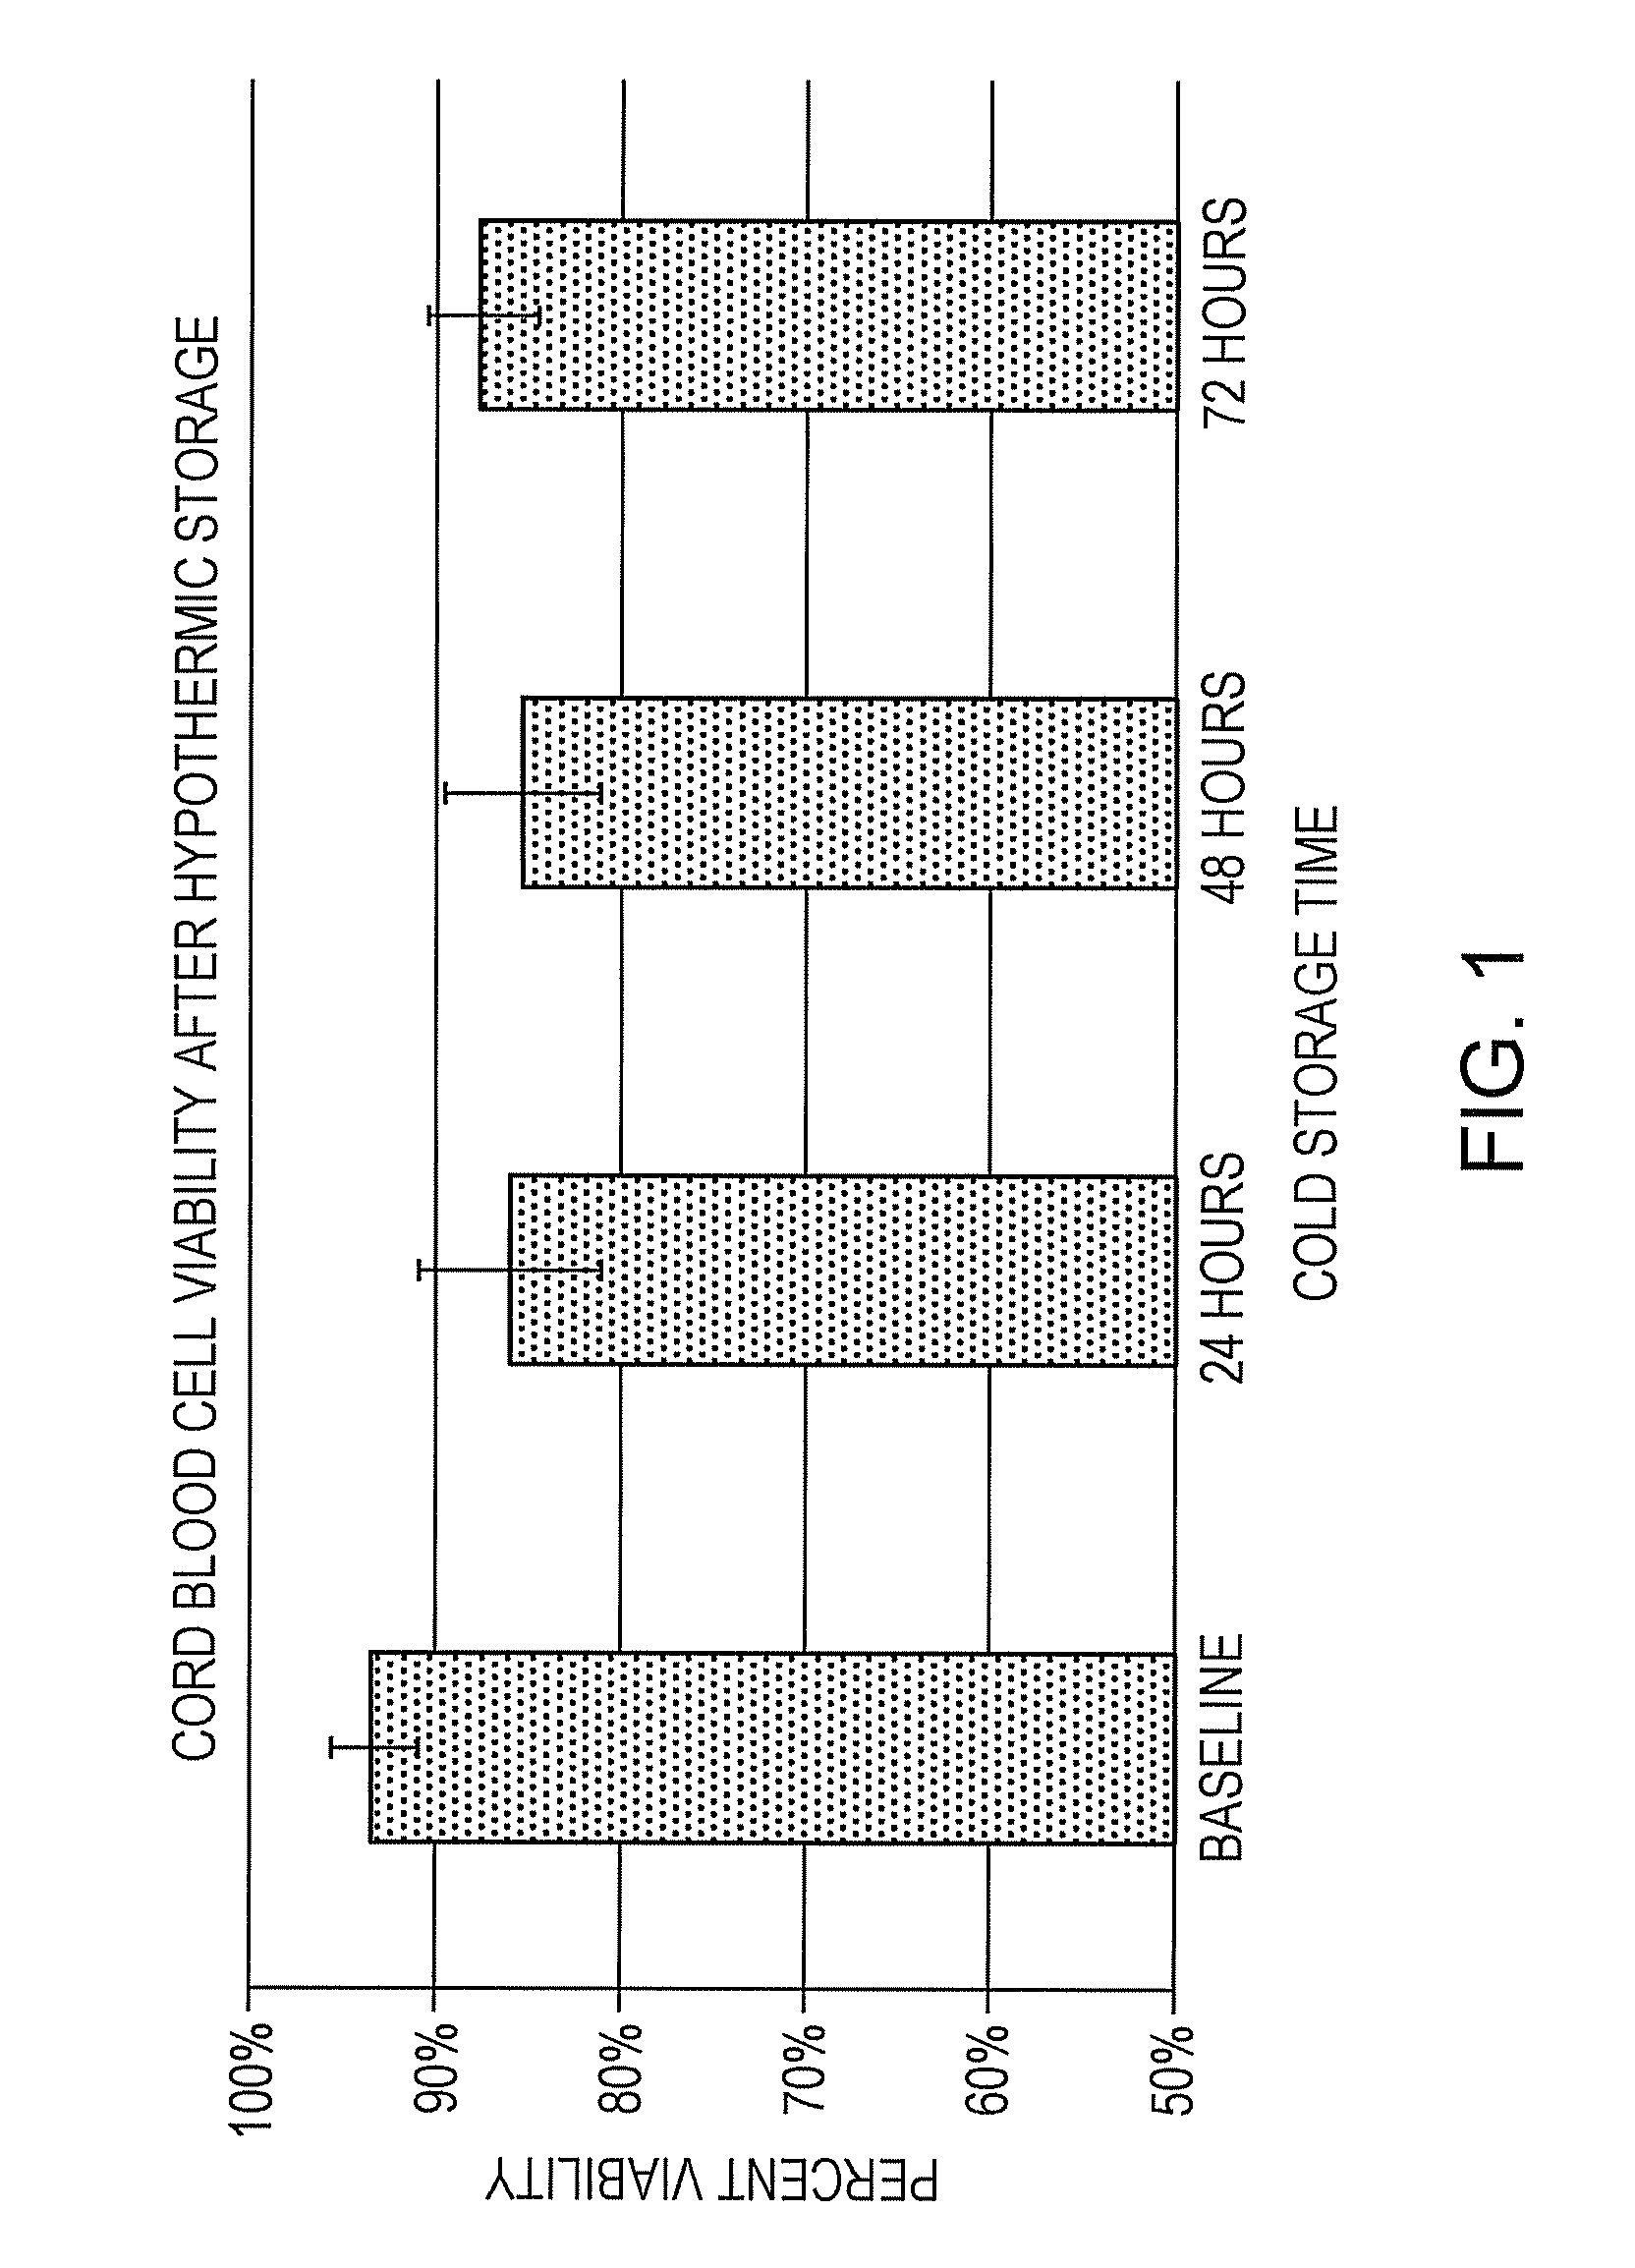 Materials and methods for hypothermic collection of whole blood